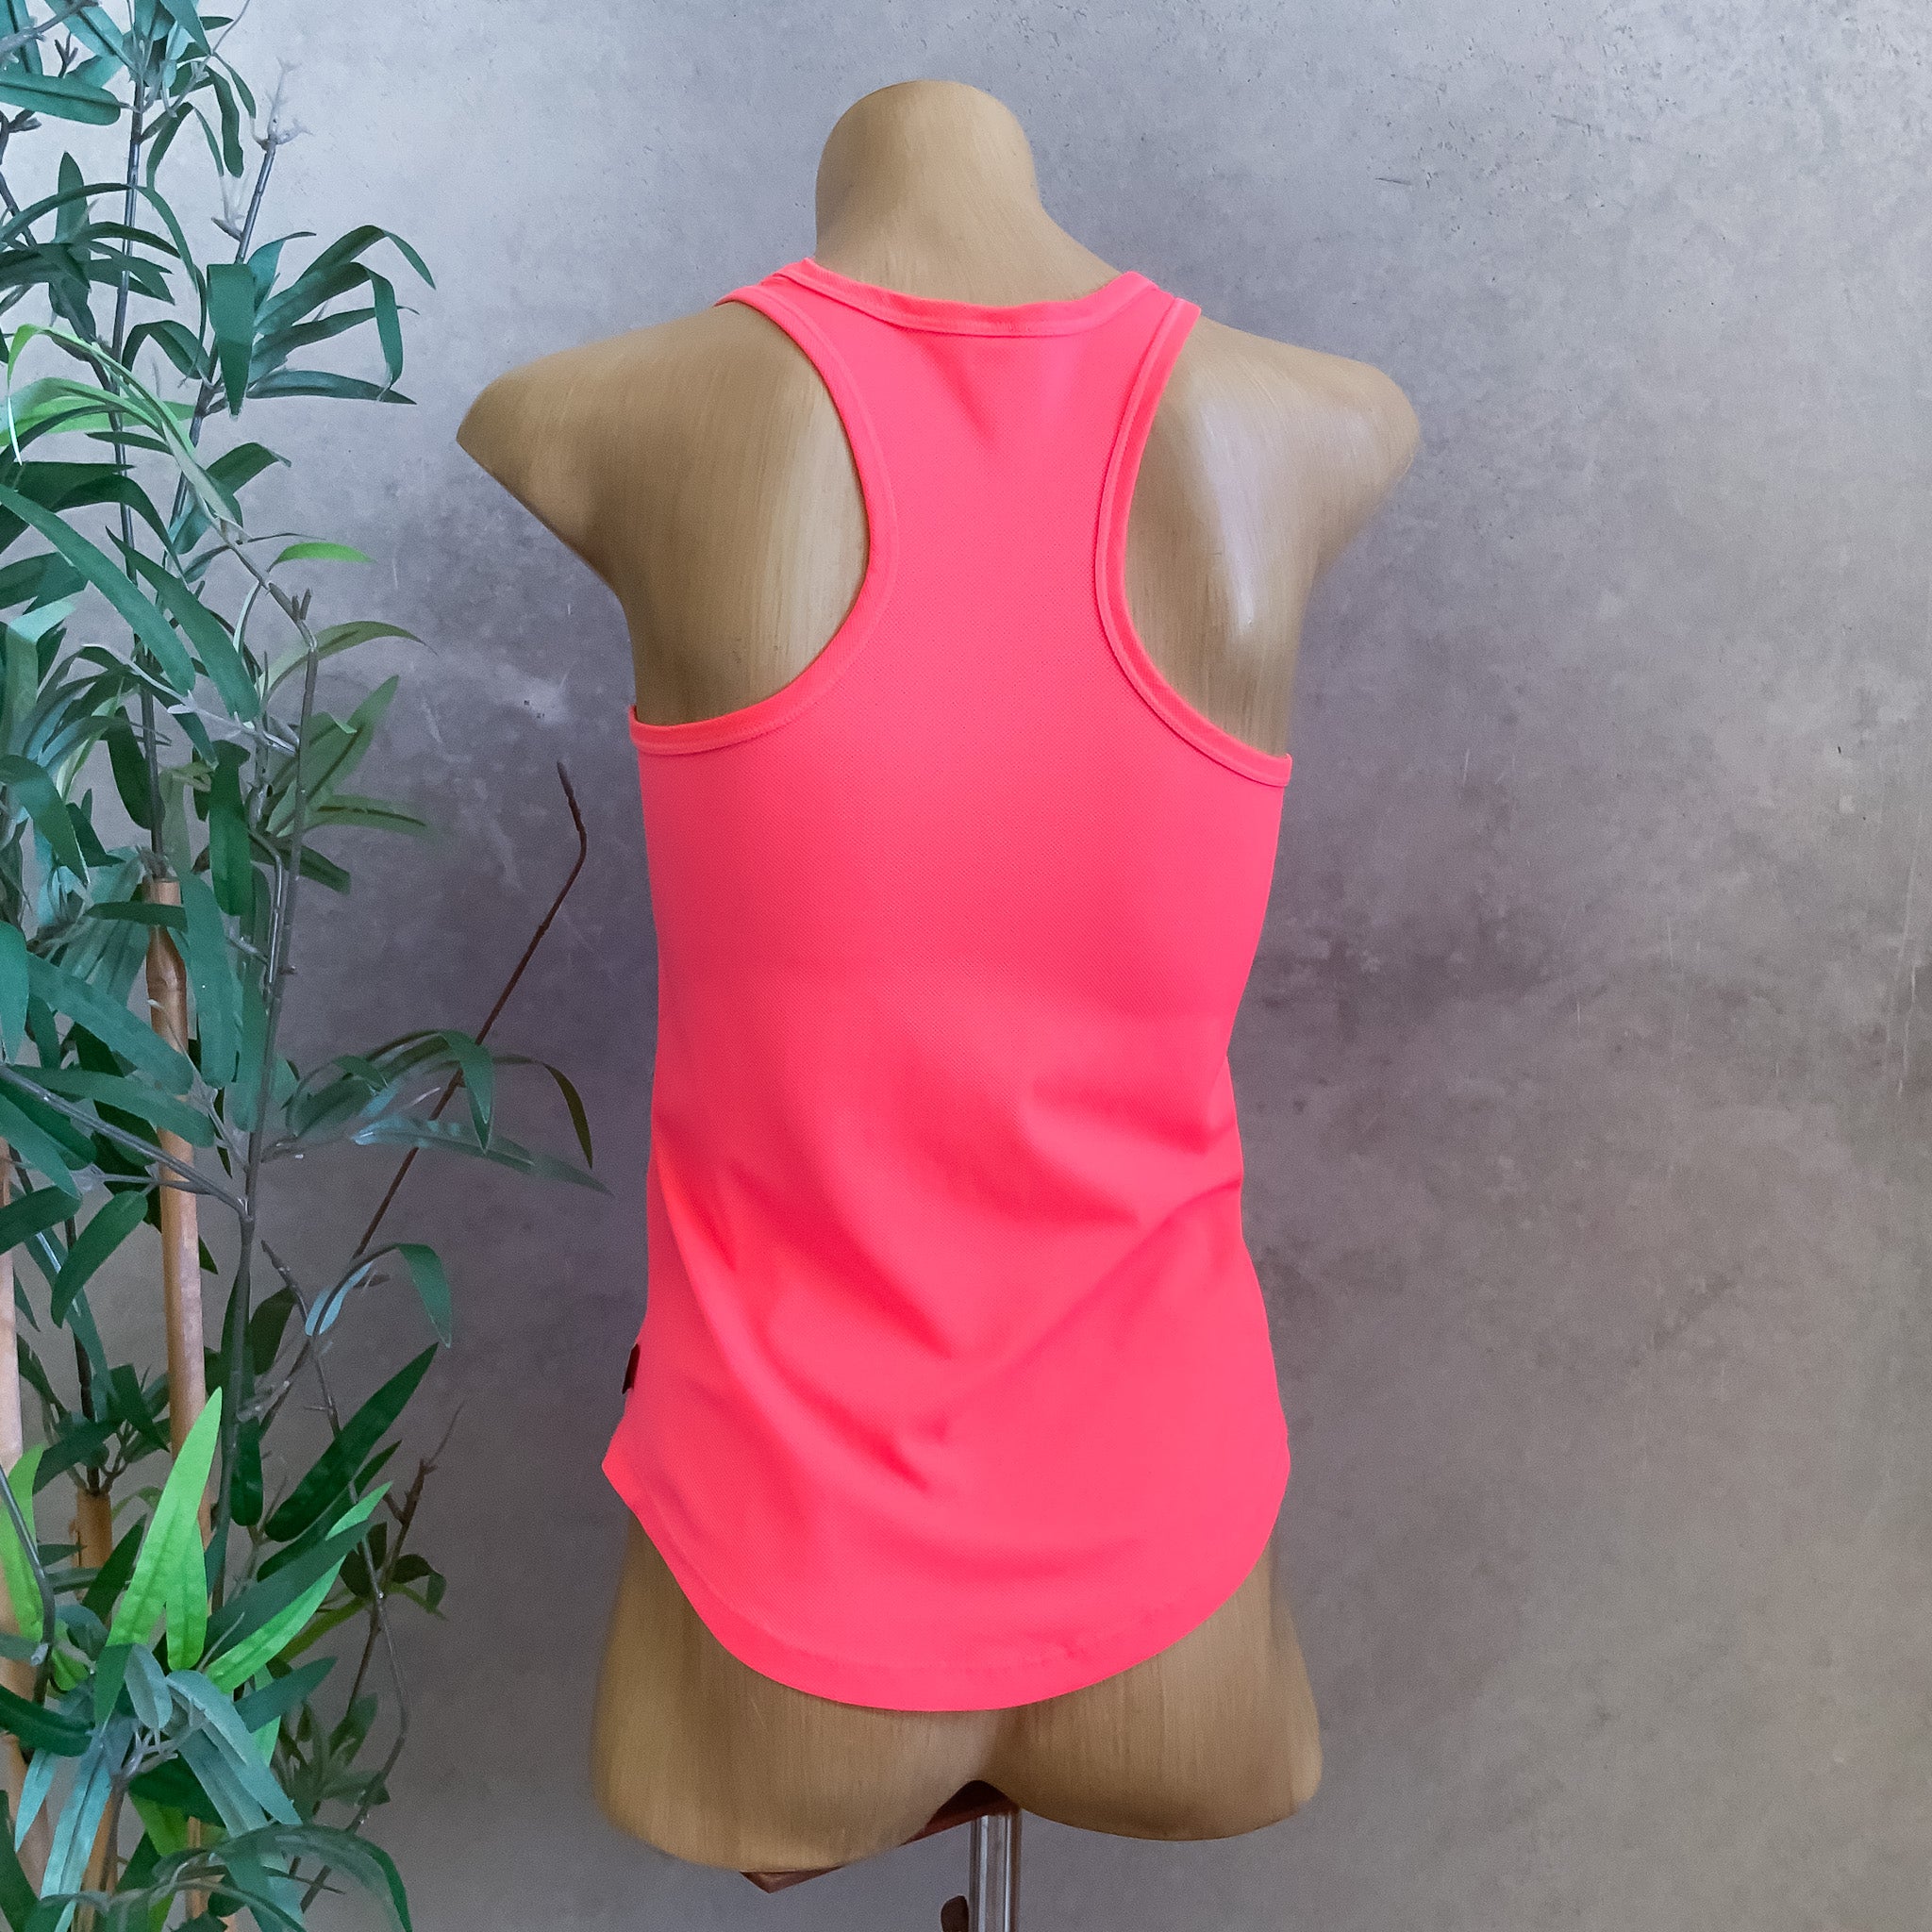 BONDS Pink Racerback Fitted Active Wear Tank Top - Size 8/10